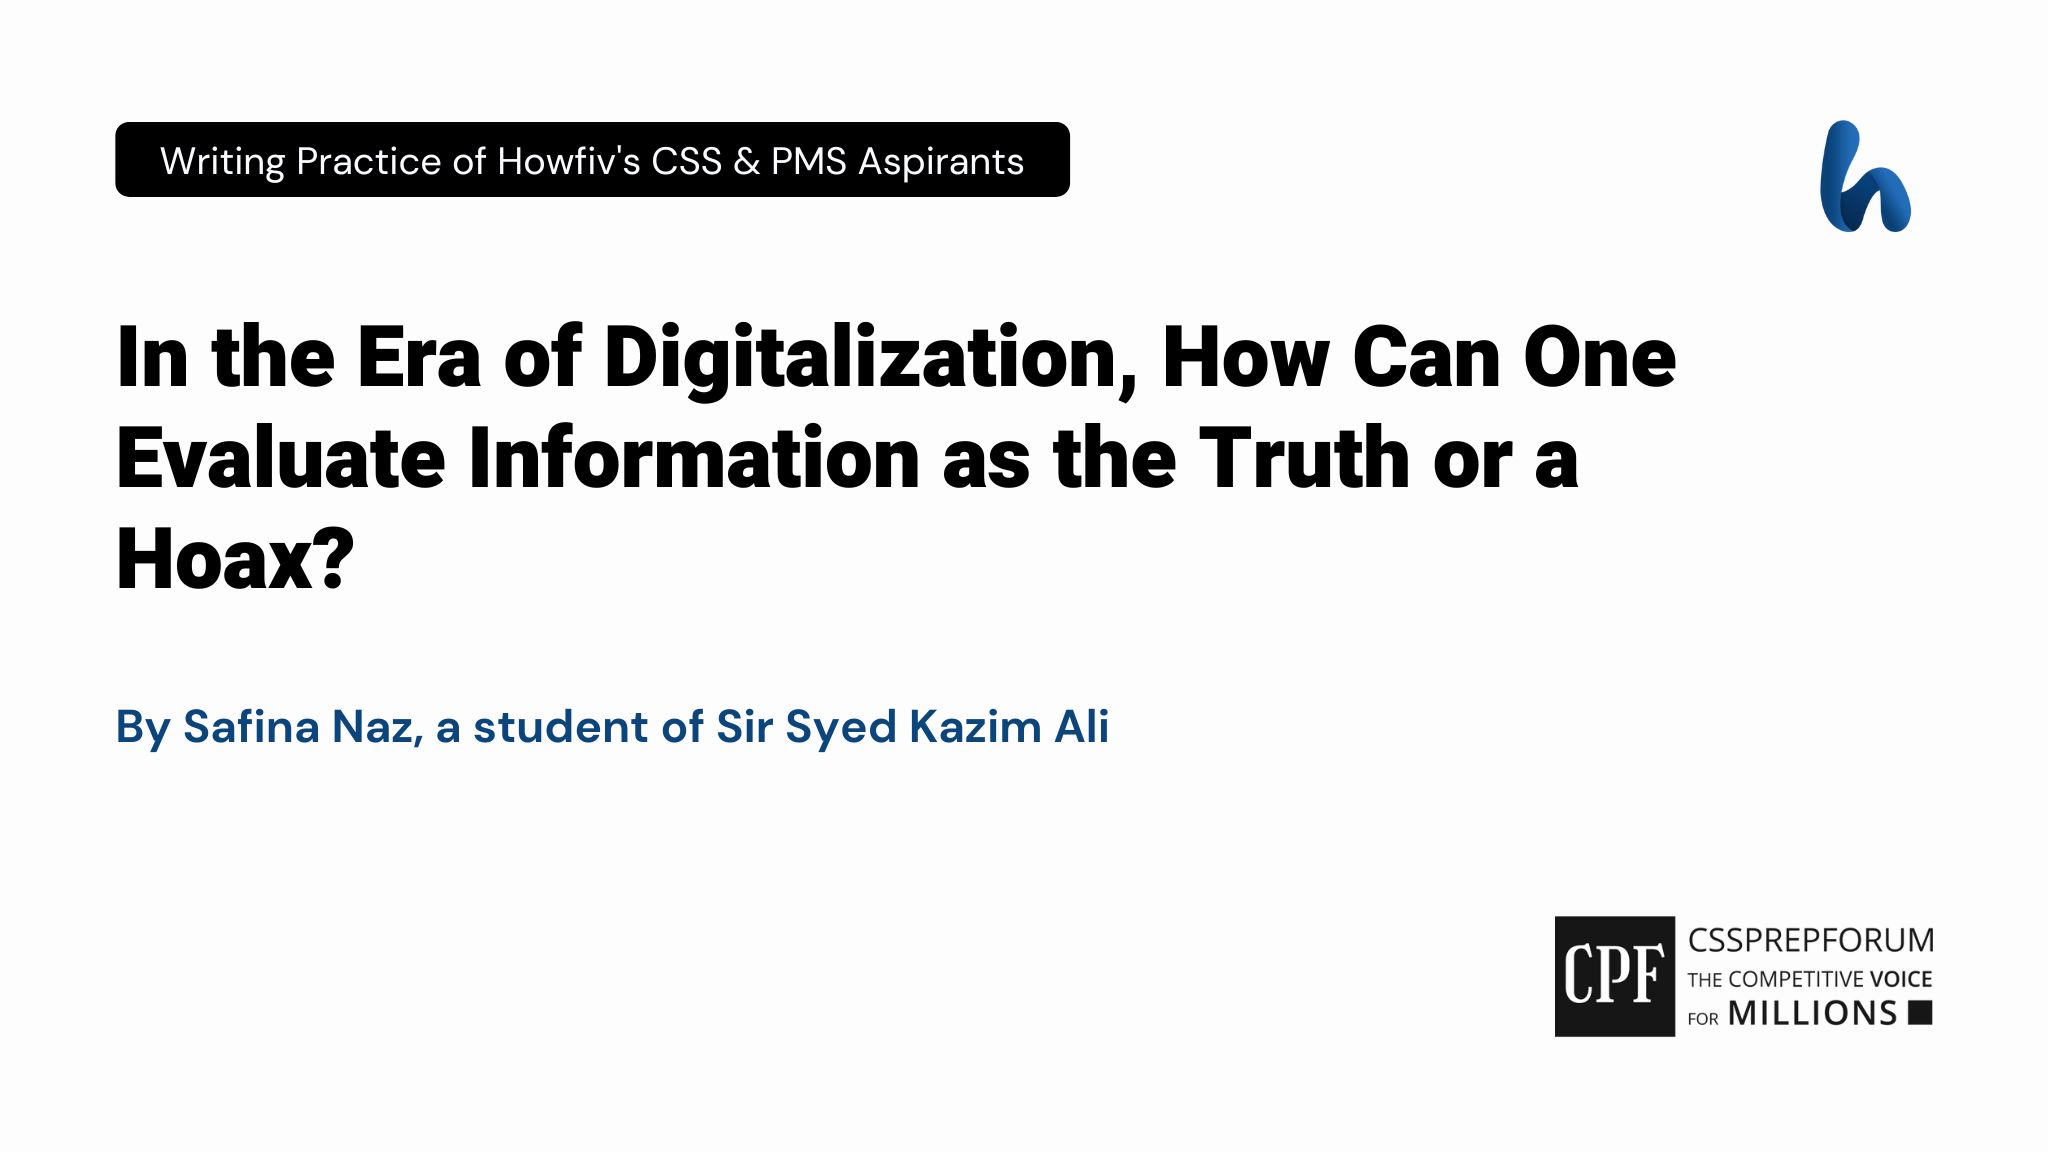 In the Era of Digitalization, How Can One Evaluate Information as a Truth or a Hoax by Safina Naz